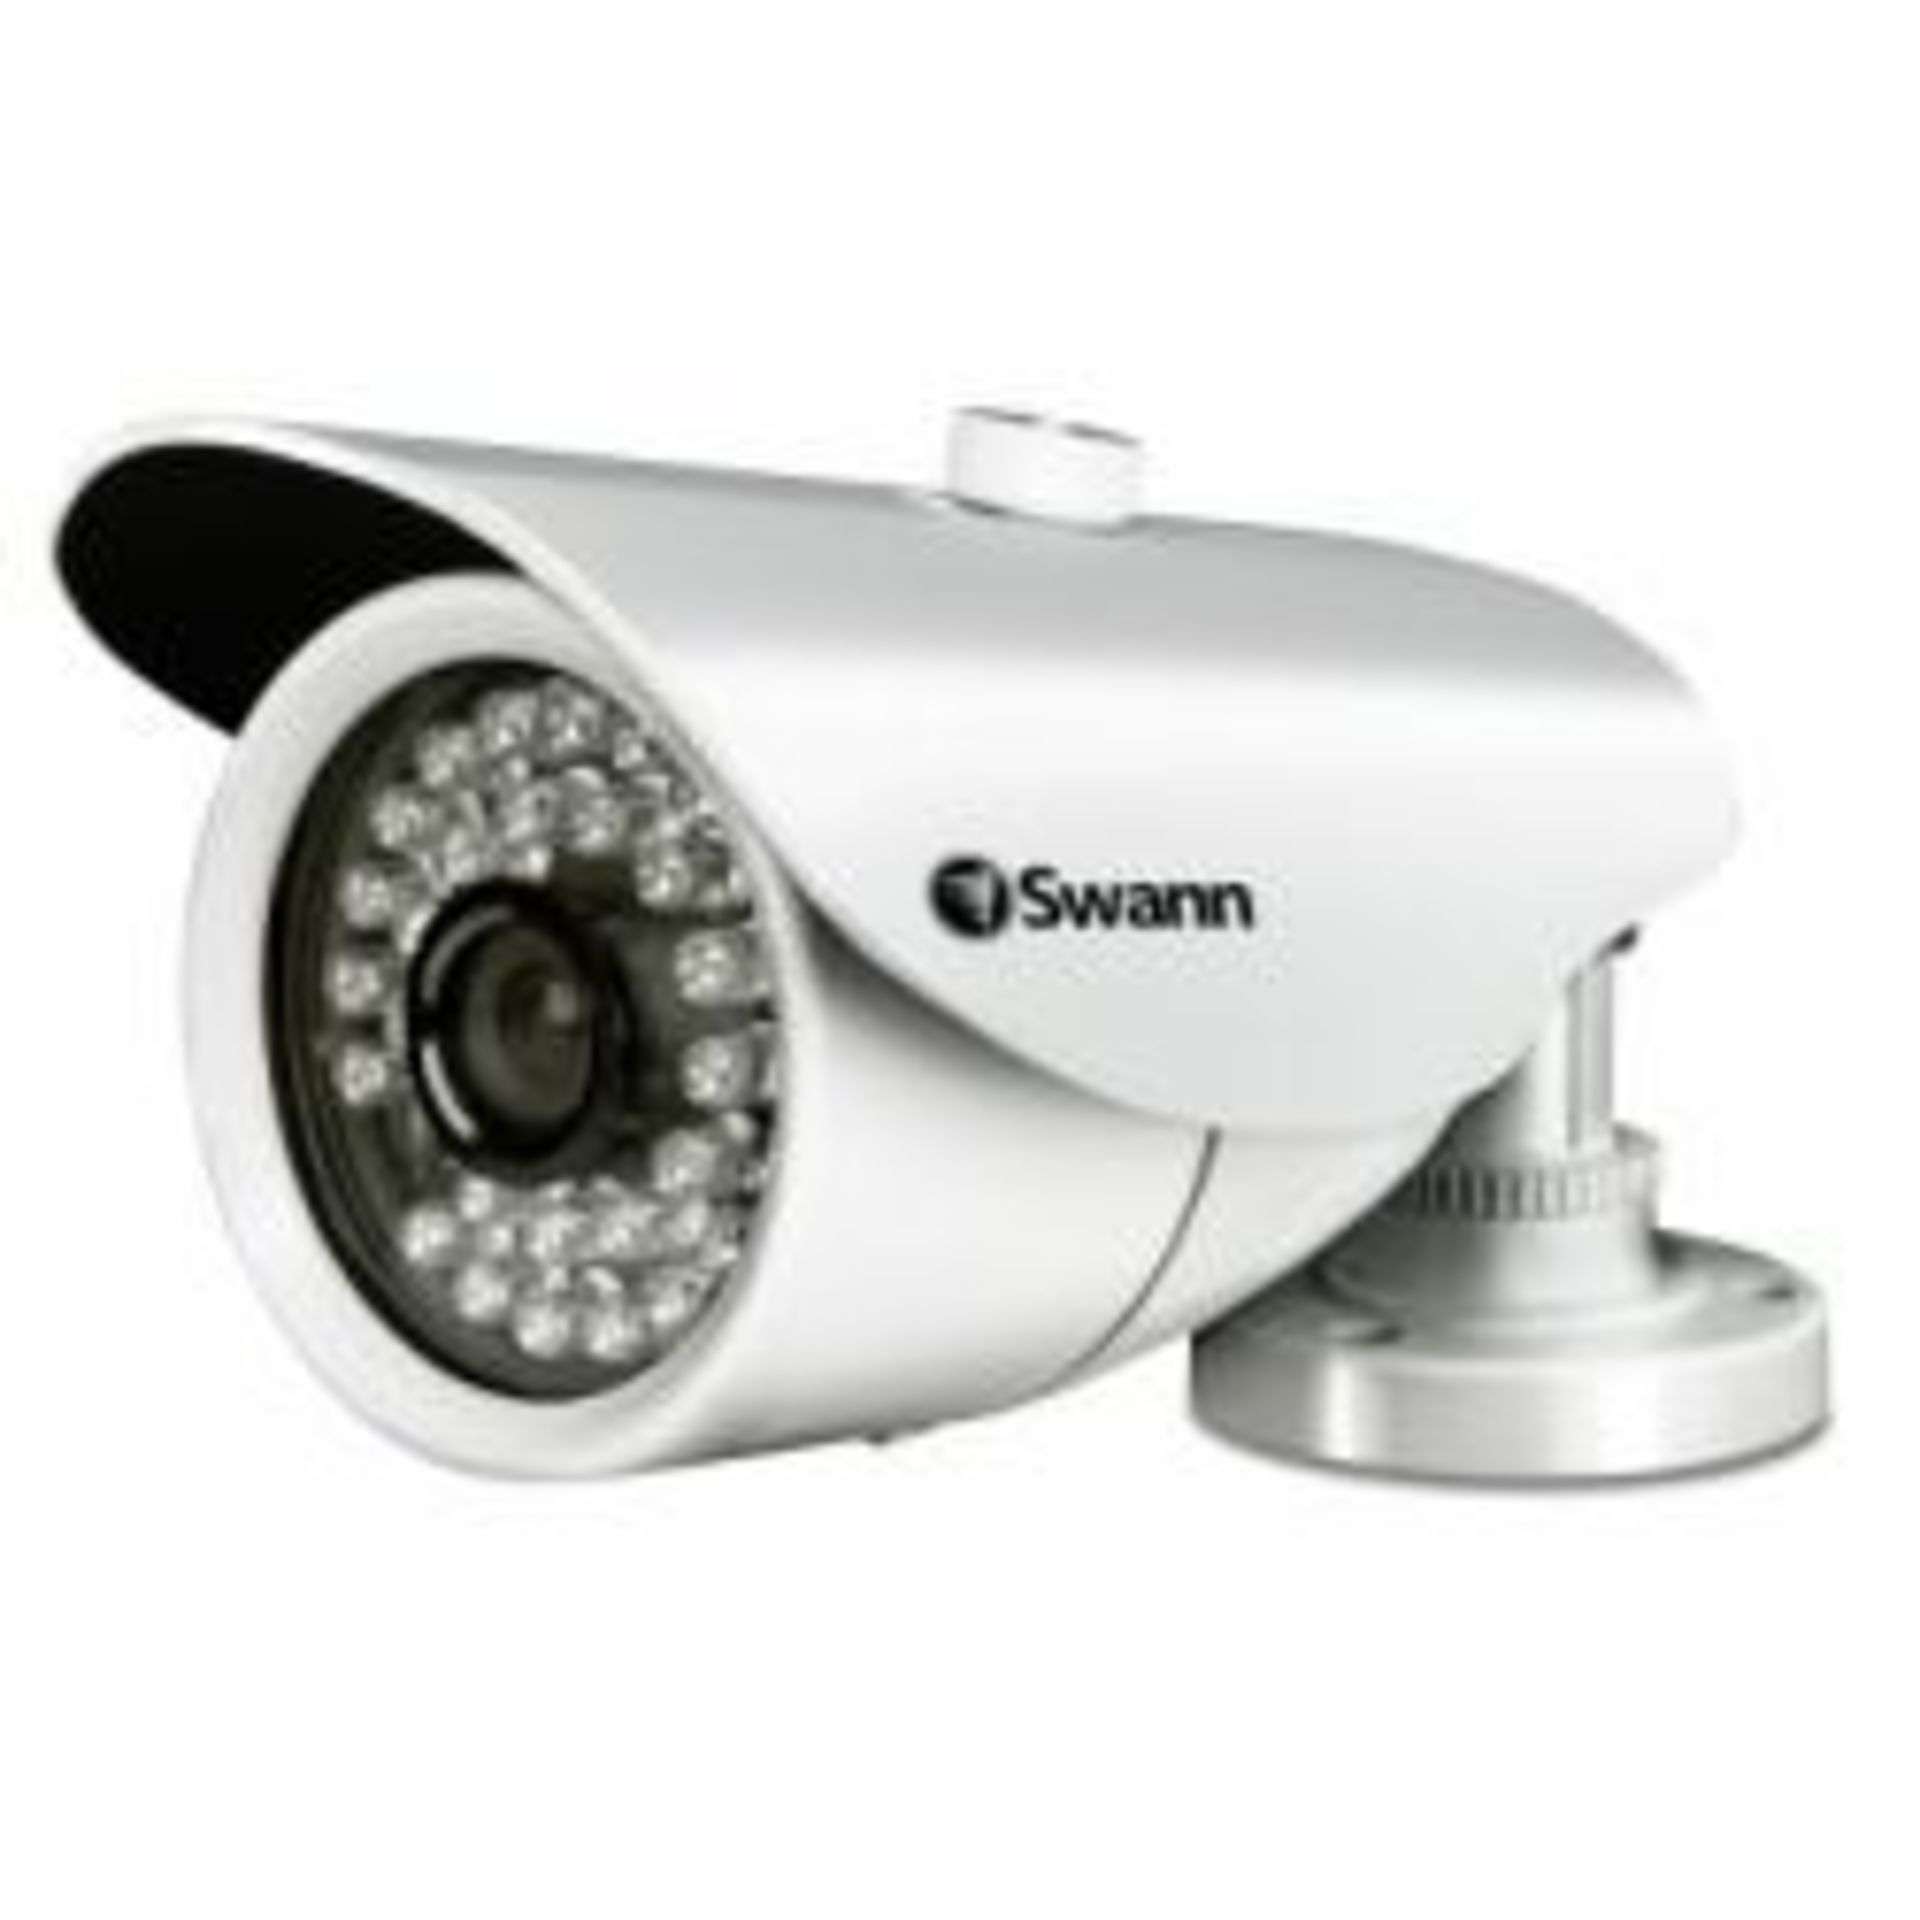 V Brand New Swann PRO-870 Bullet Cam 850 TVL - Powerful Night Vision Up To 35m/114ft